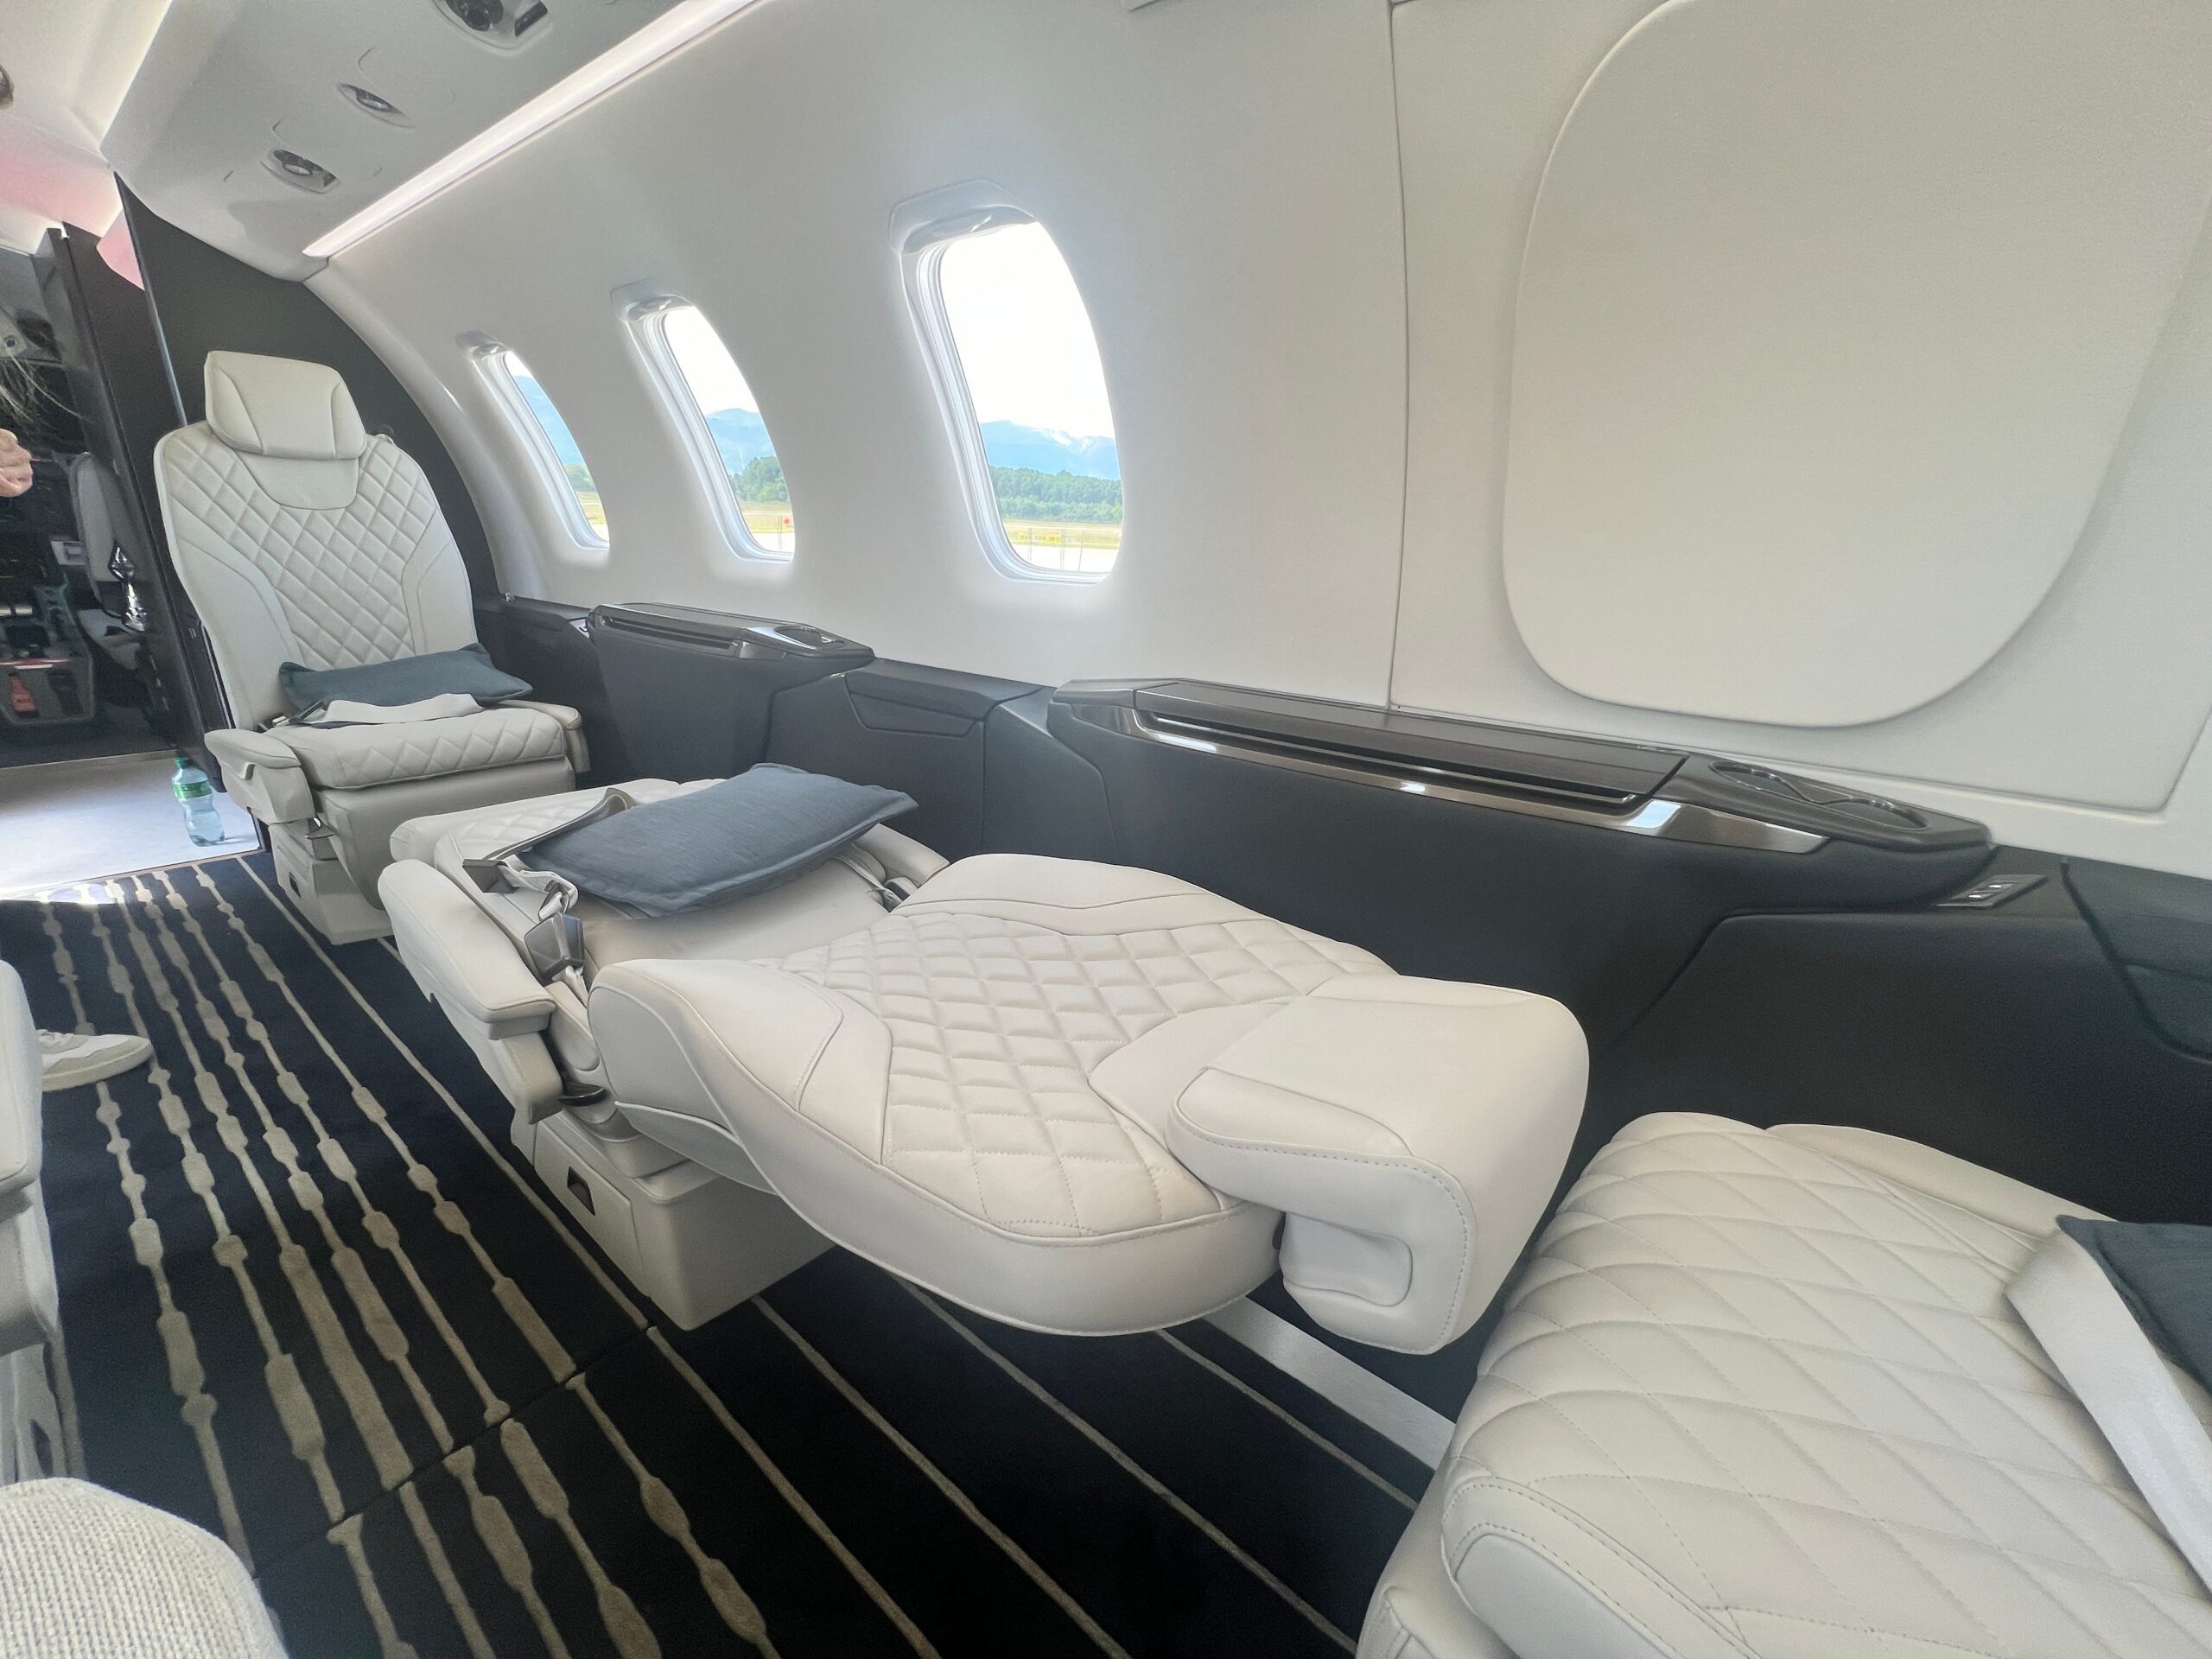 A seat in the lie-flat position on board a Pilatus PC-24